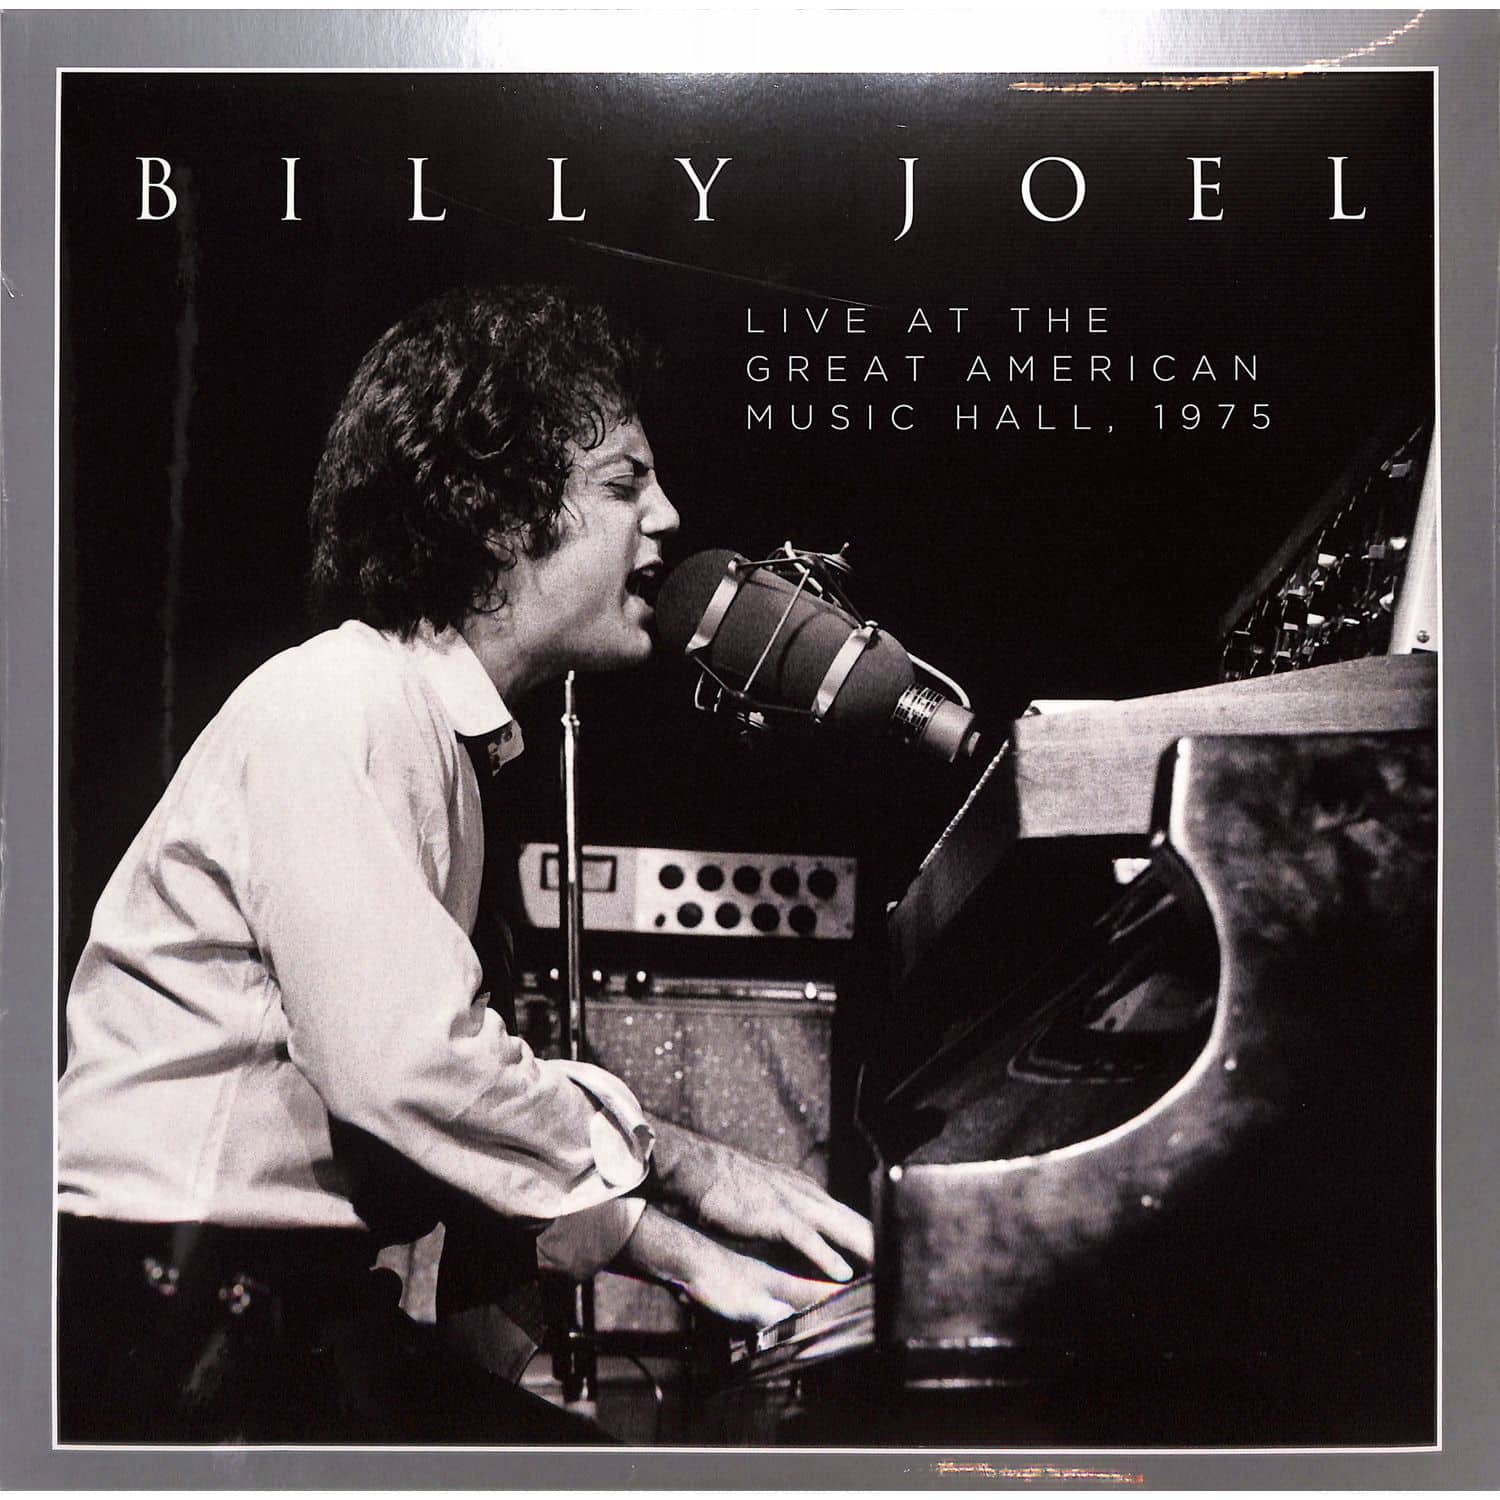 Billy Joel - LIVE AT THE GREAT AMERICAN MUSIC HALL - 1975 